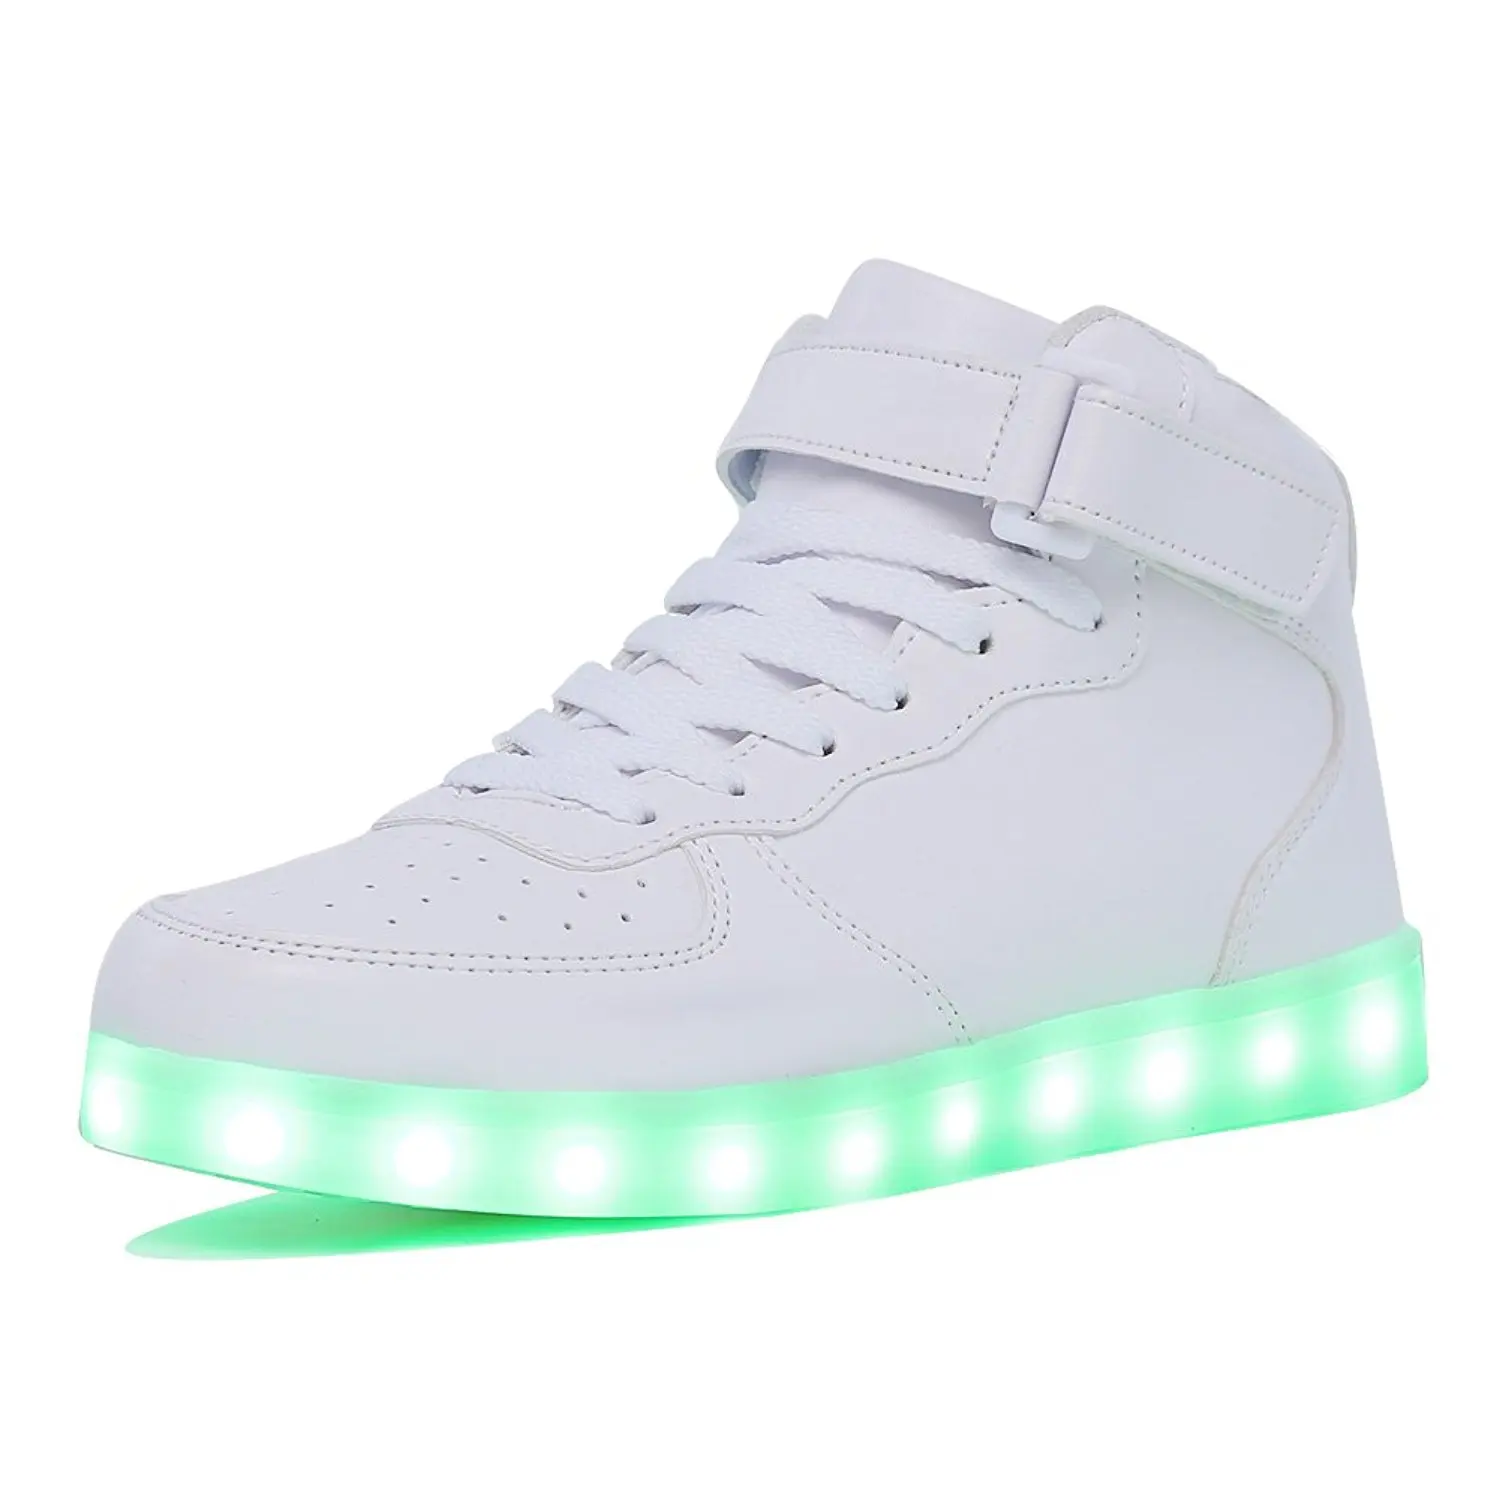 

KRIATIV Adult&Kids Boy and Girl's High Top LED Light Up Shoes Glowing Sneakers Luminous Sole Sneakers for Women&Men Party Wear